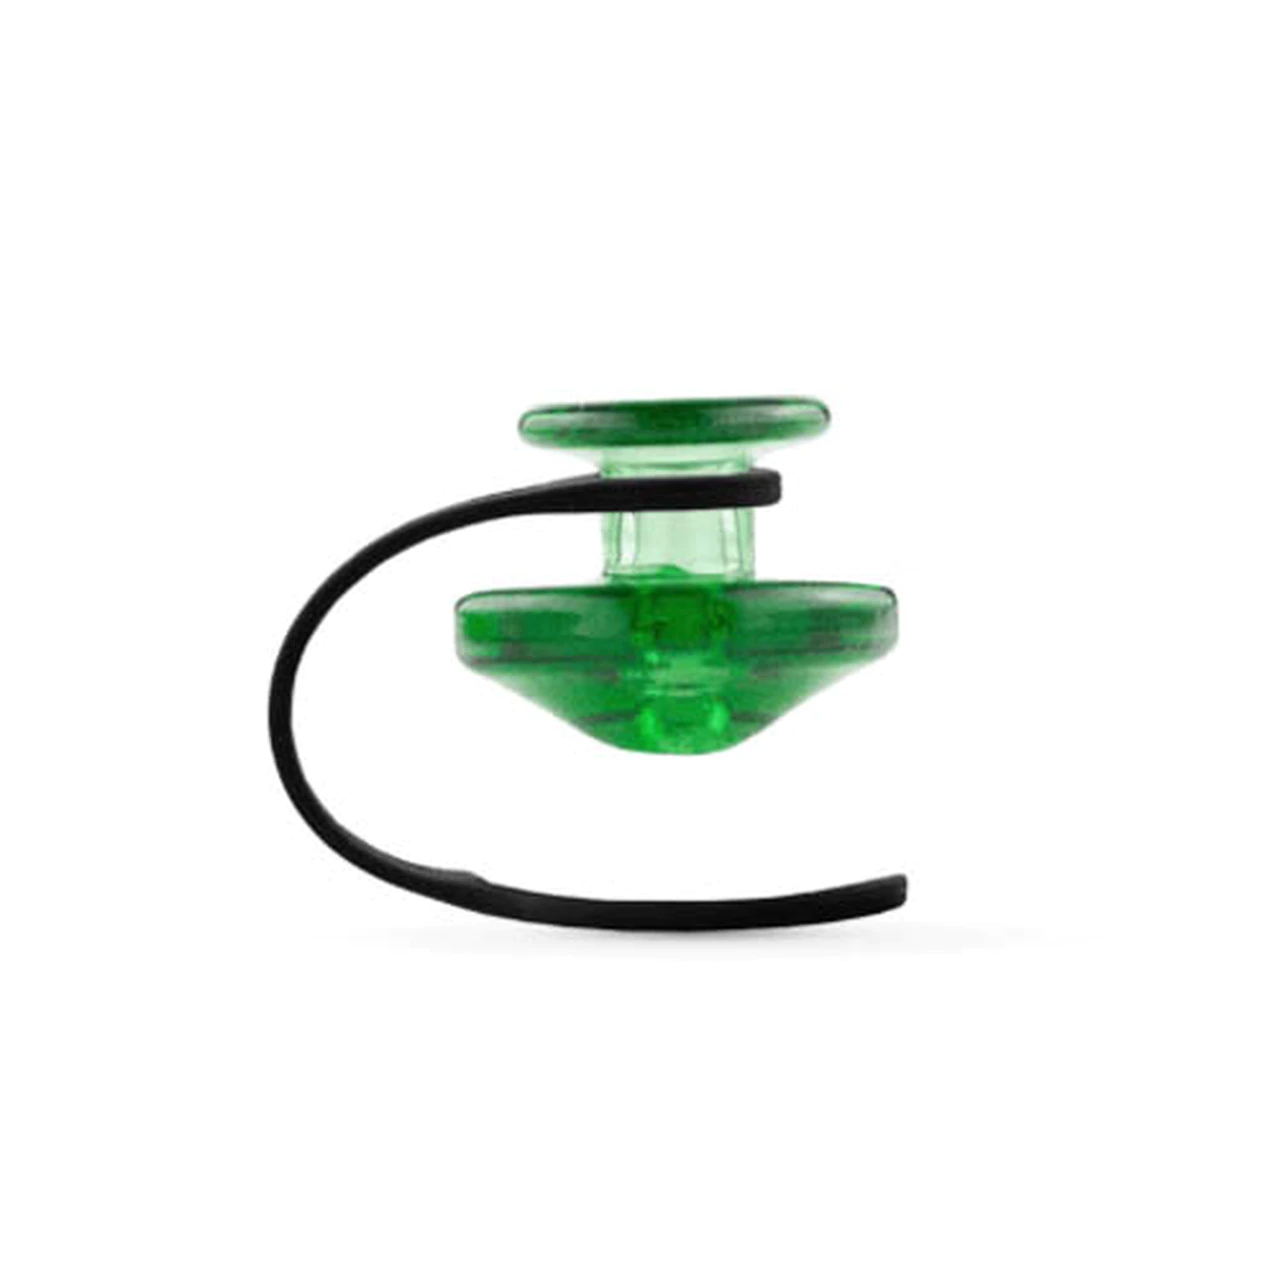 Green_carb_cap_and_tether__04205.1568845724